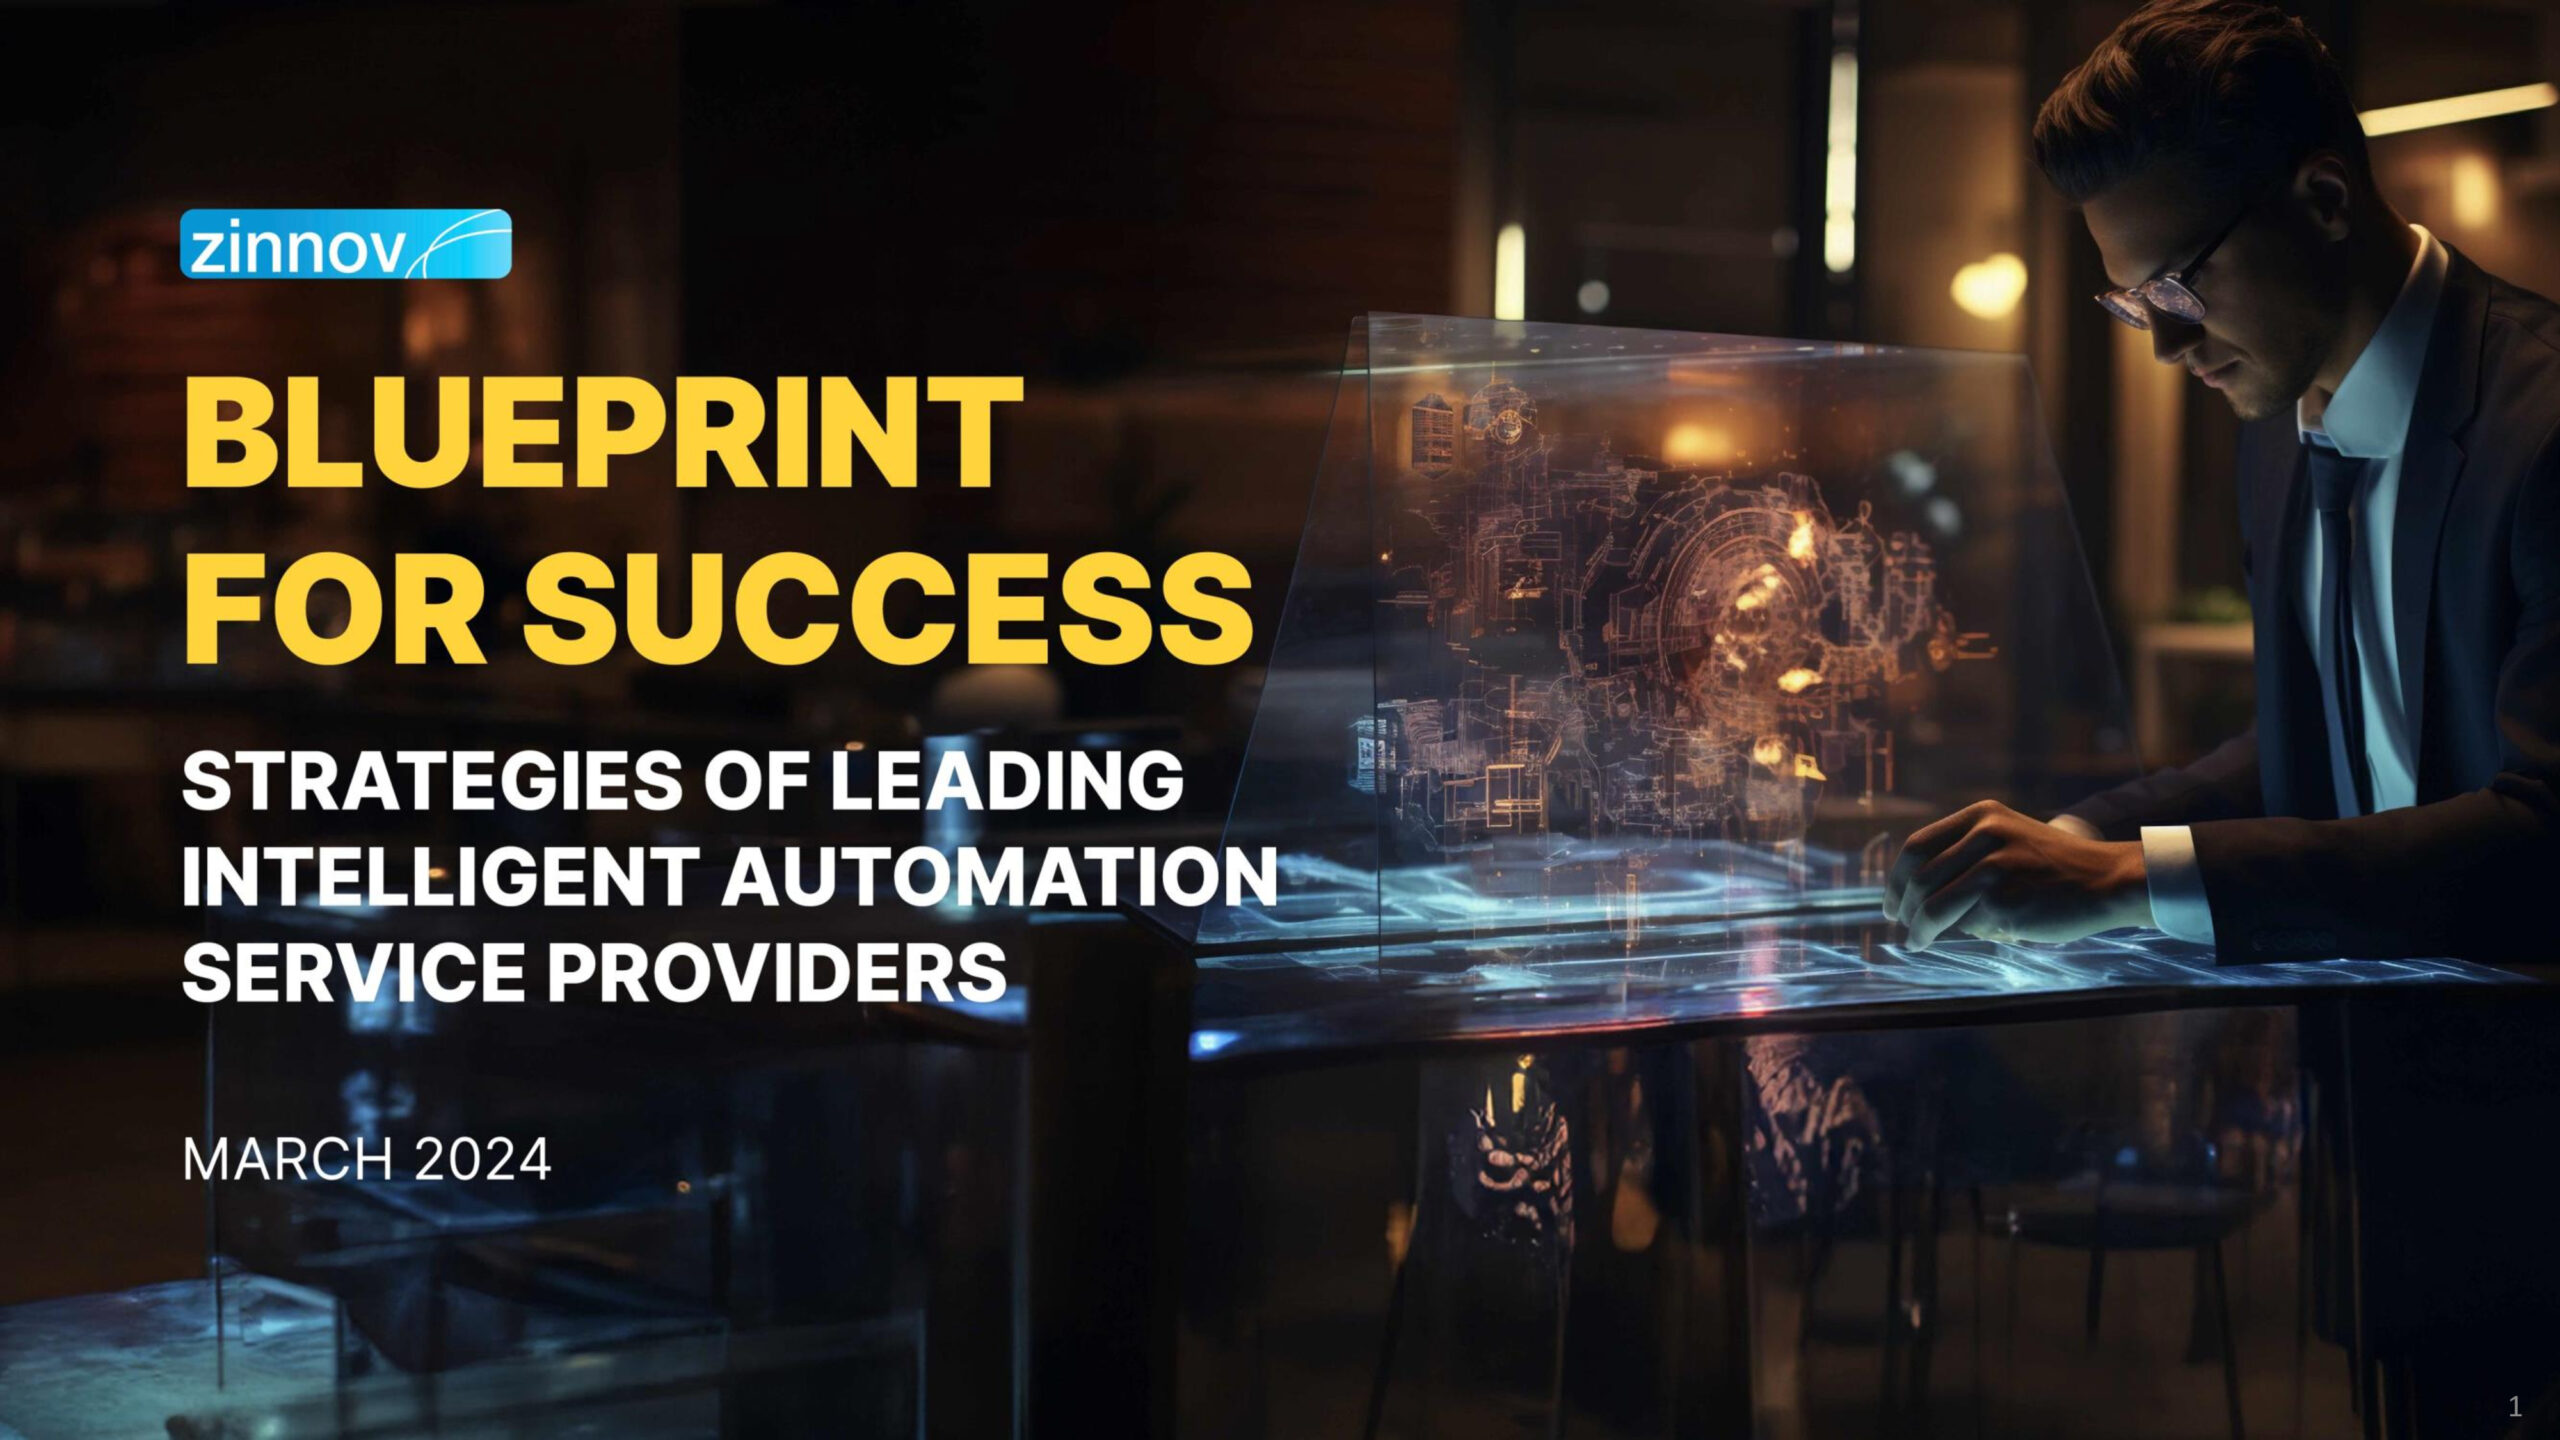 Zinnov Blueprint For Success Winning Strategies For Intelligent Automation Service Providers Report1 Scaled